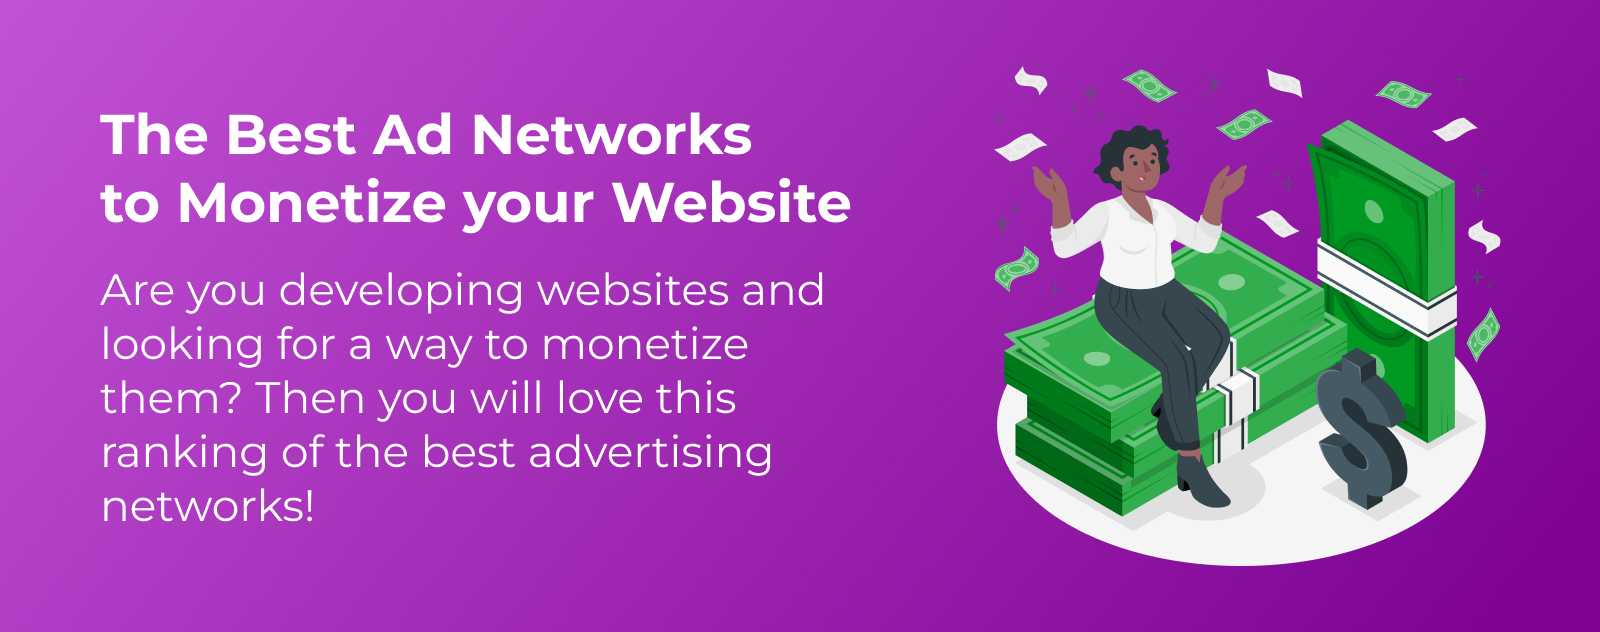 The Best Advertising Networks for your website